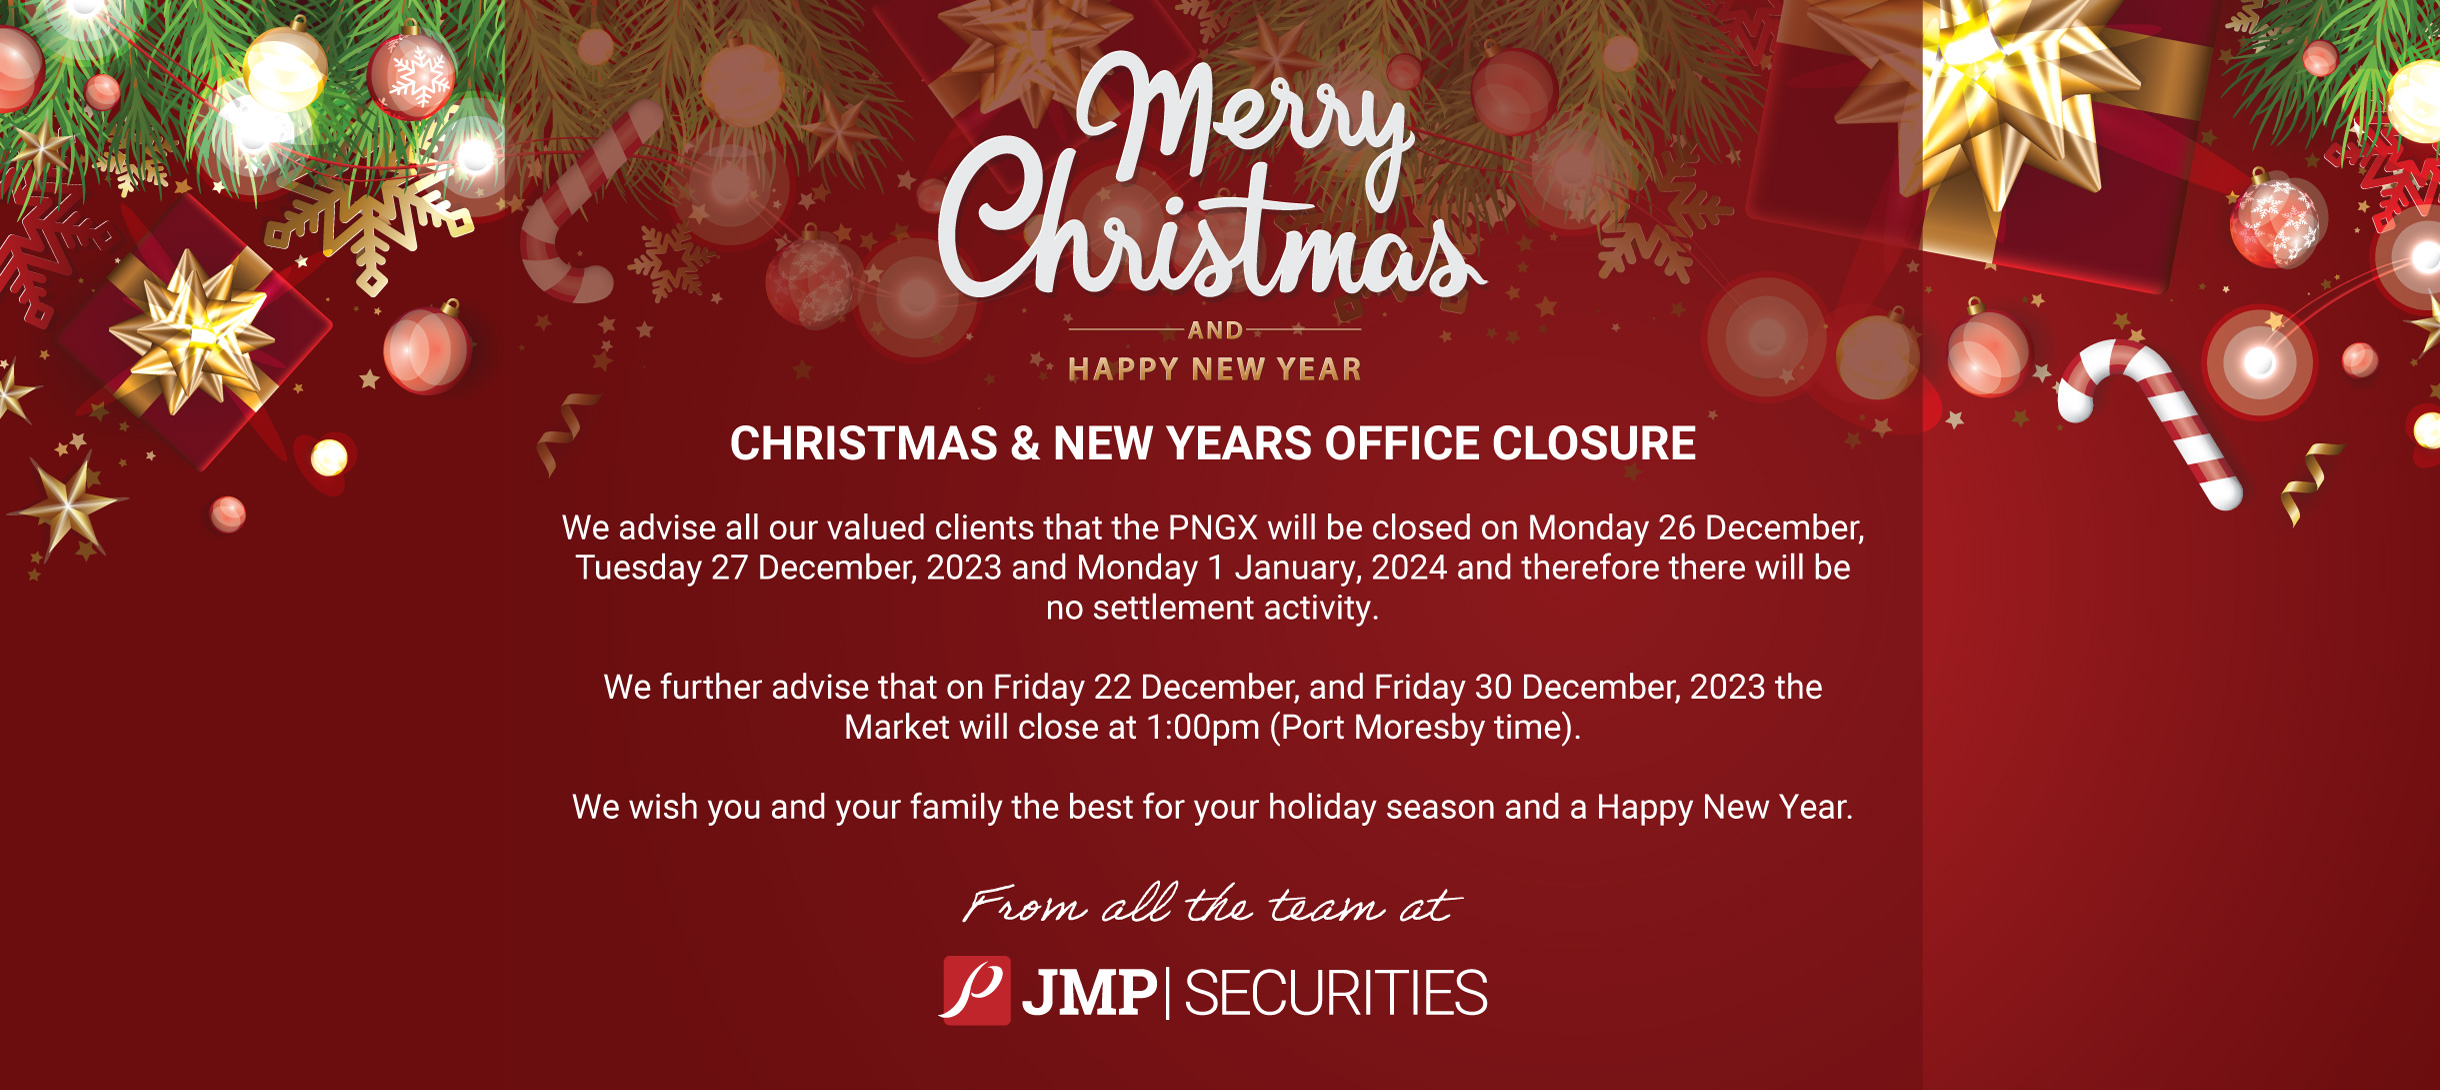 Merry Christmas and Happy New Year from all the team at JMP Securities